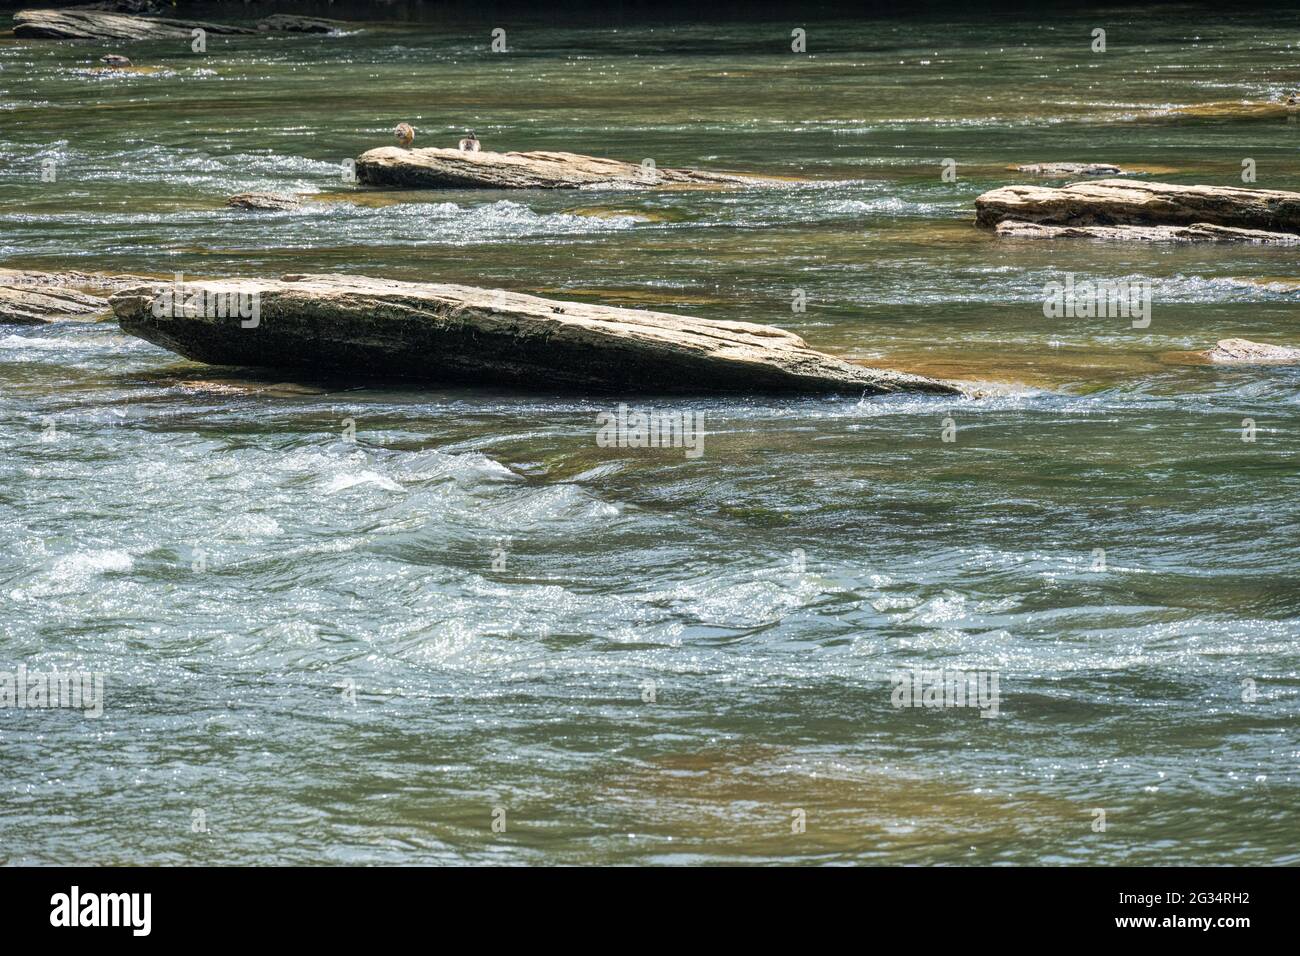 Chattahoochee River flowing between Sandy Springs and Roswell, Georgia in the Chattahoochee River National Recreation Area. (USA) Stock Photo